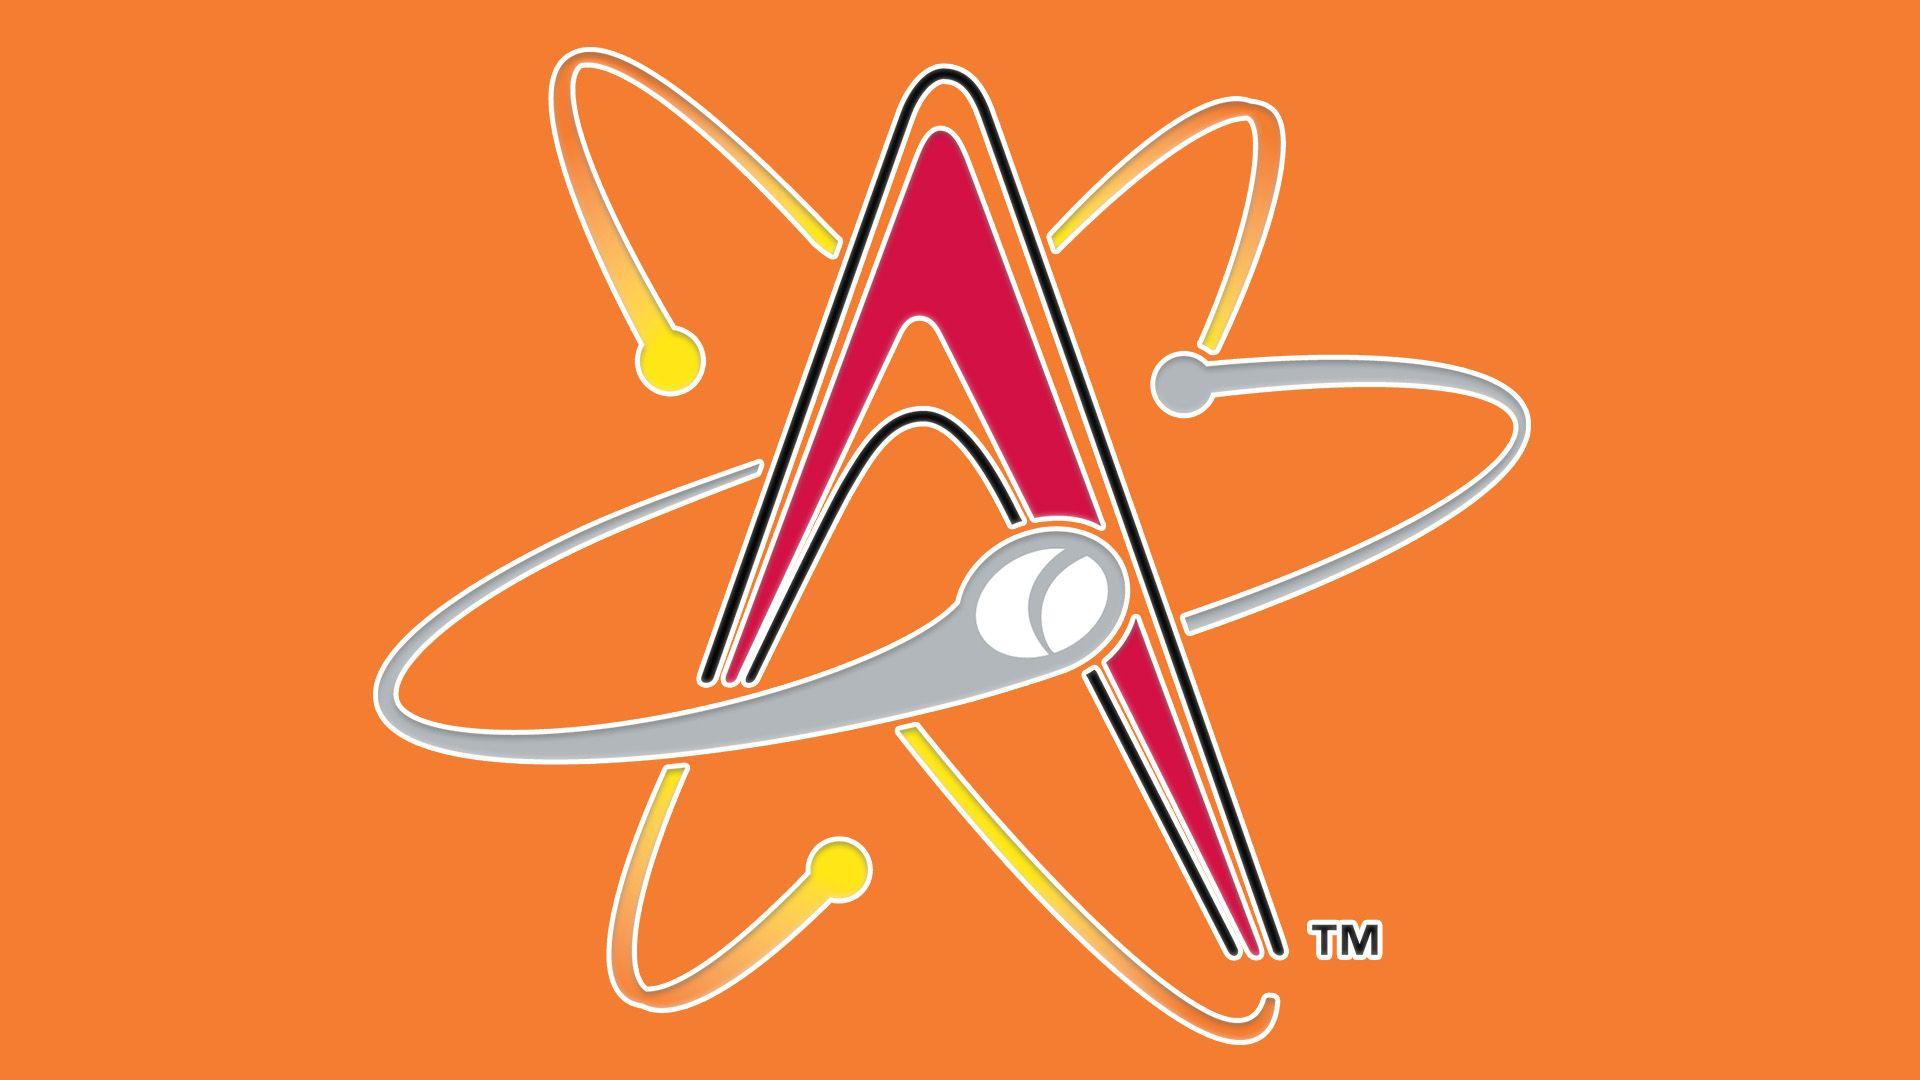 Isotopes Logo - Meaning Albuquerque Isotopes logo and symbol | history and evolution